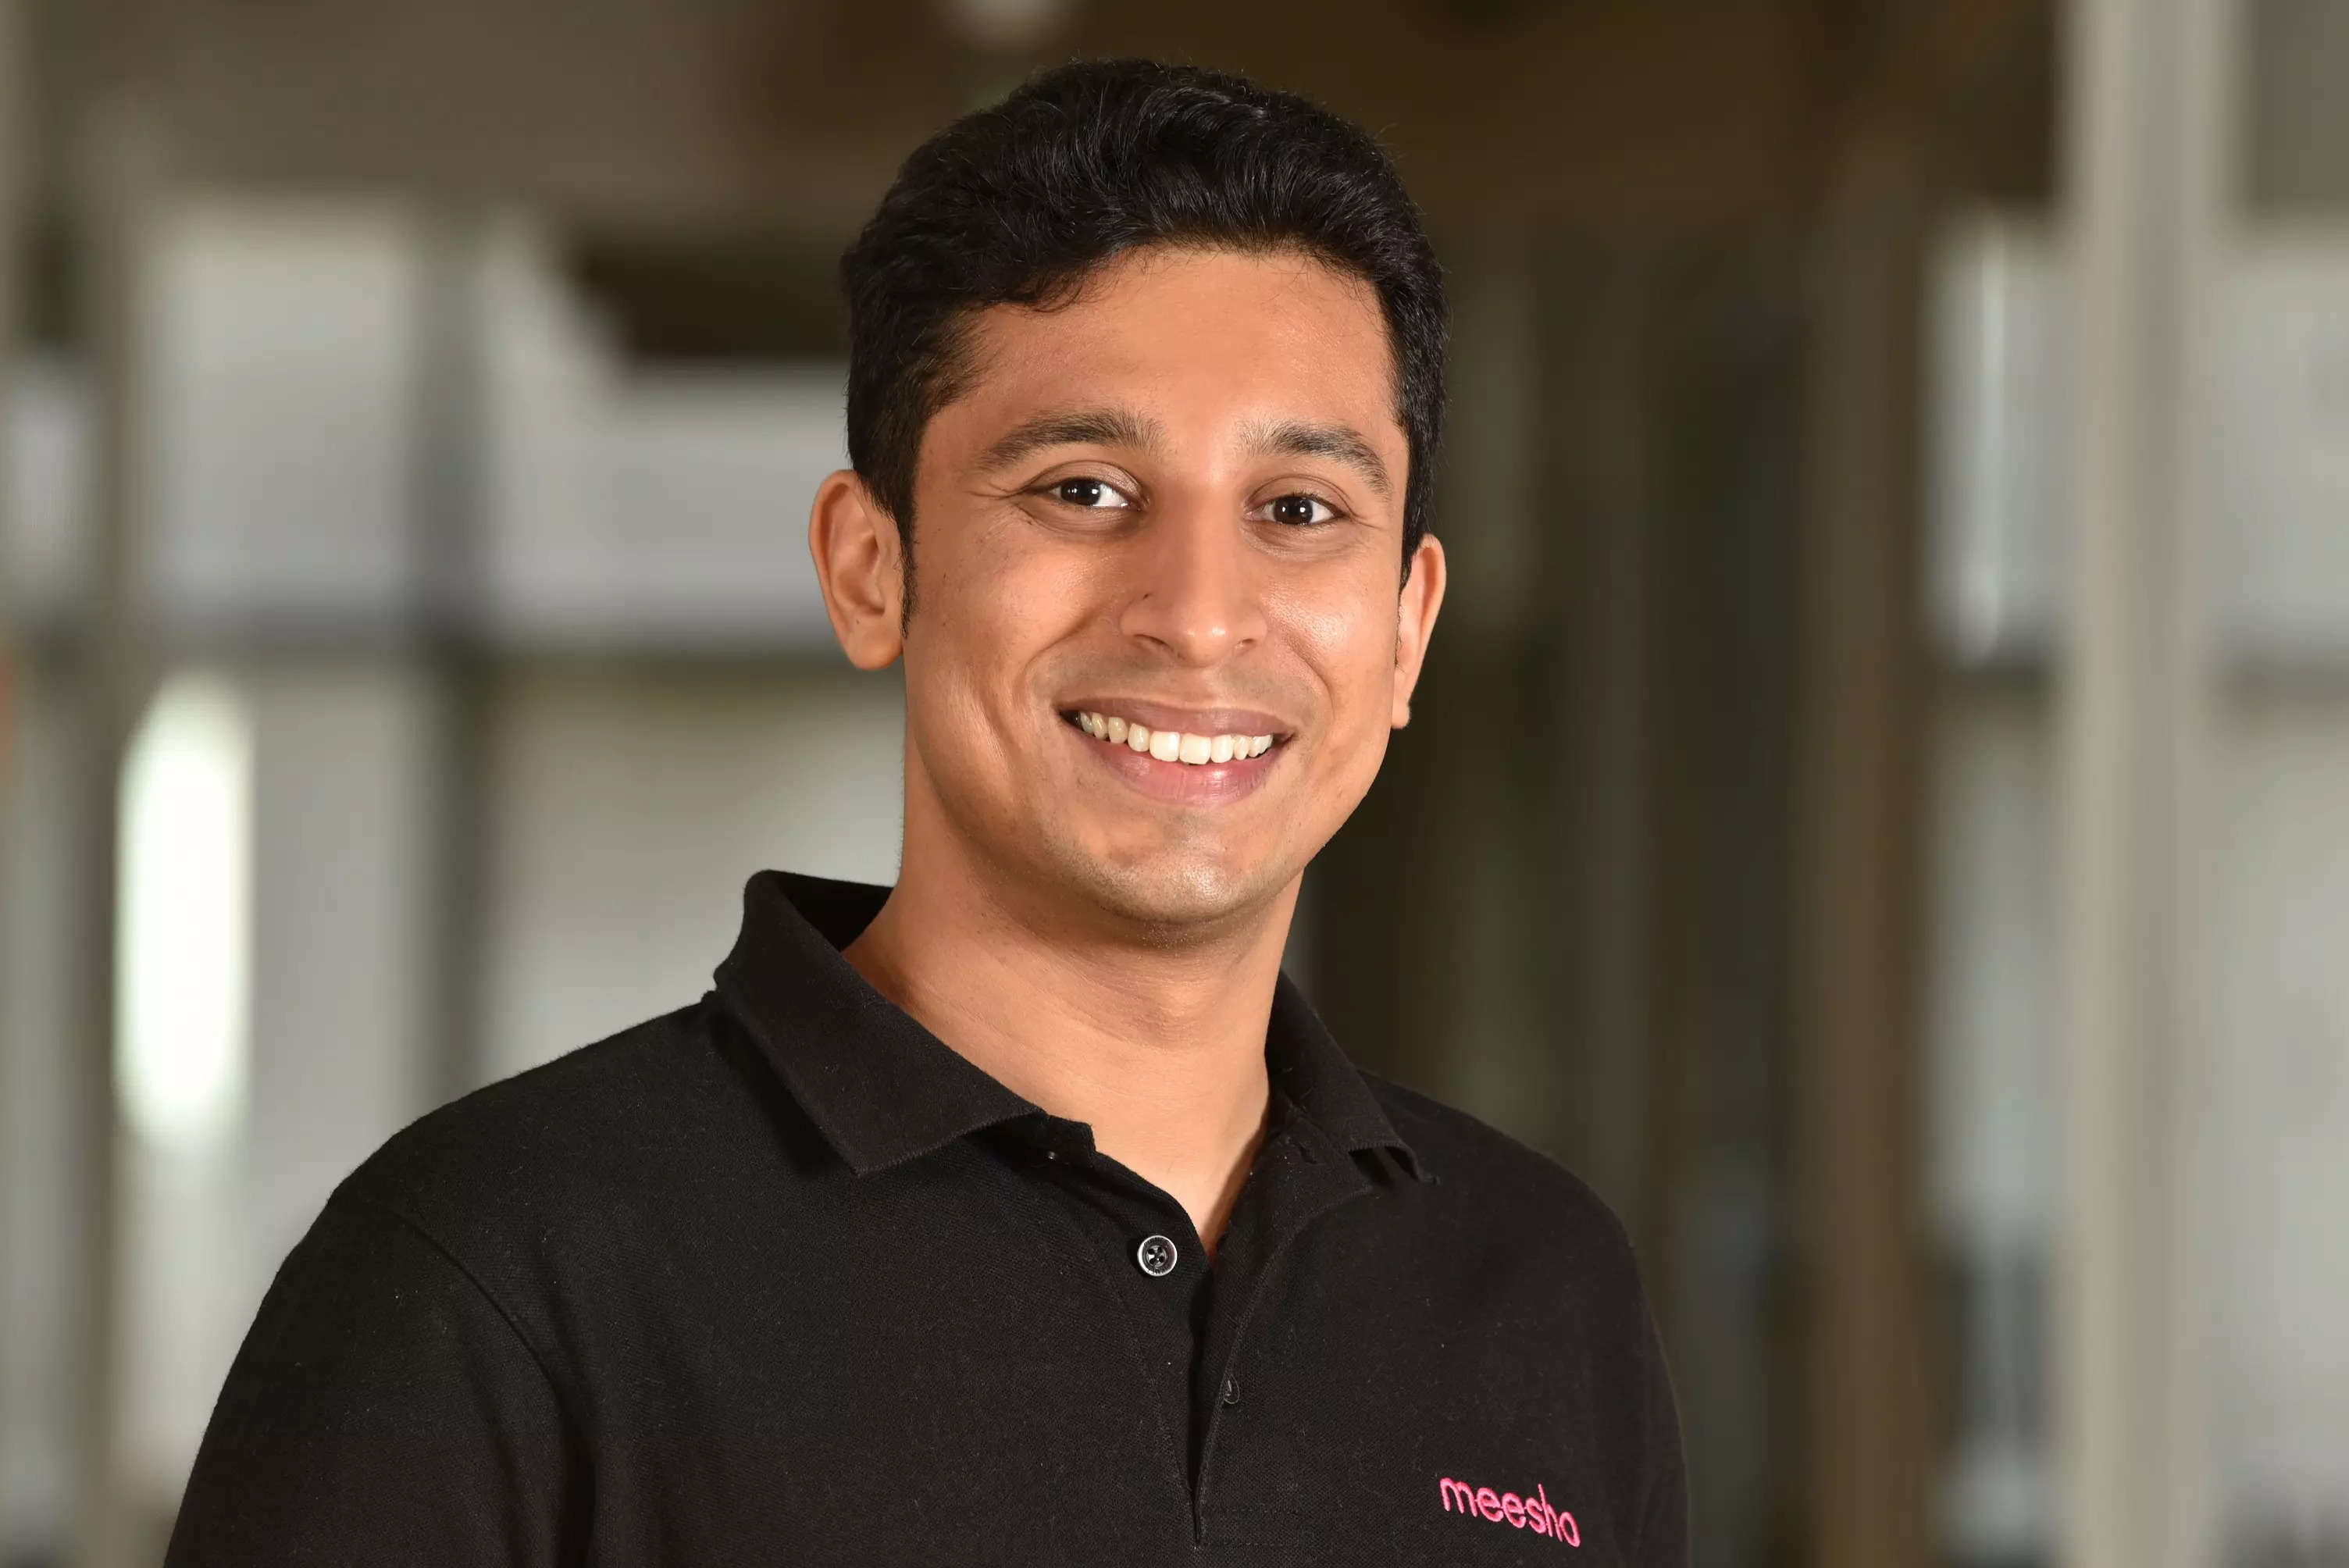 Meesho CEO Vidit Aatrey after announcing layoffs